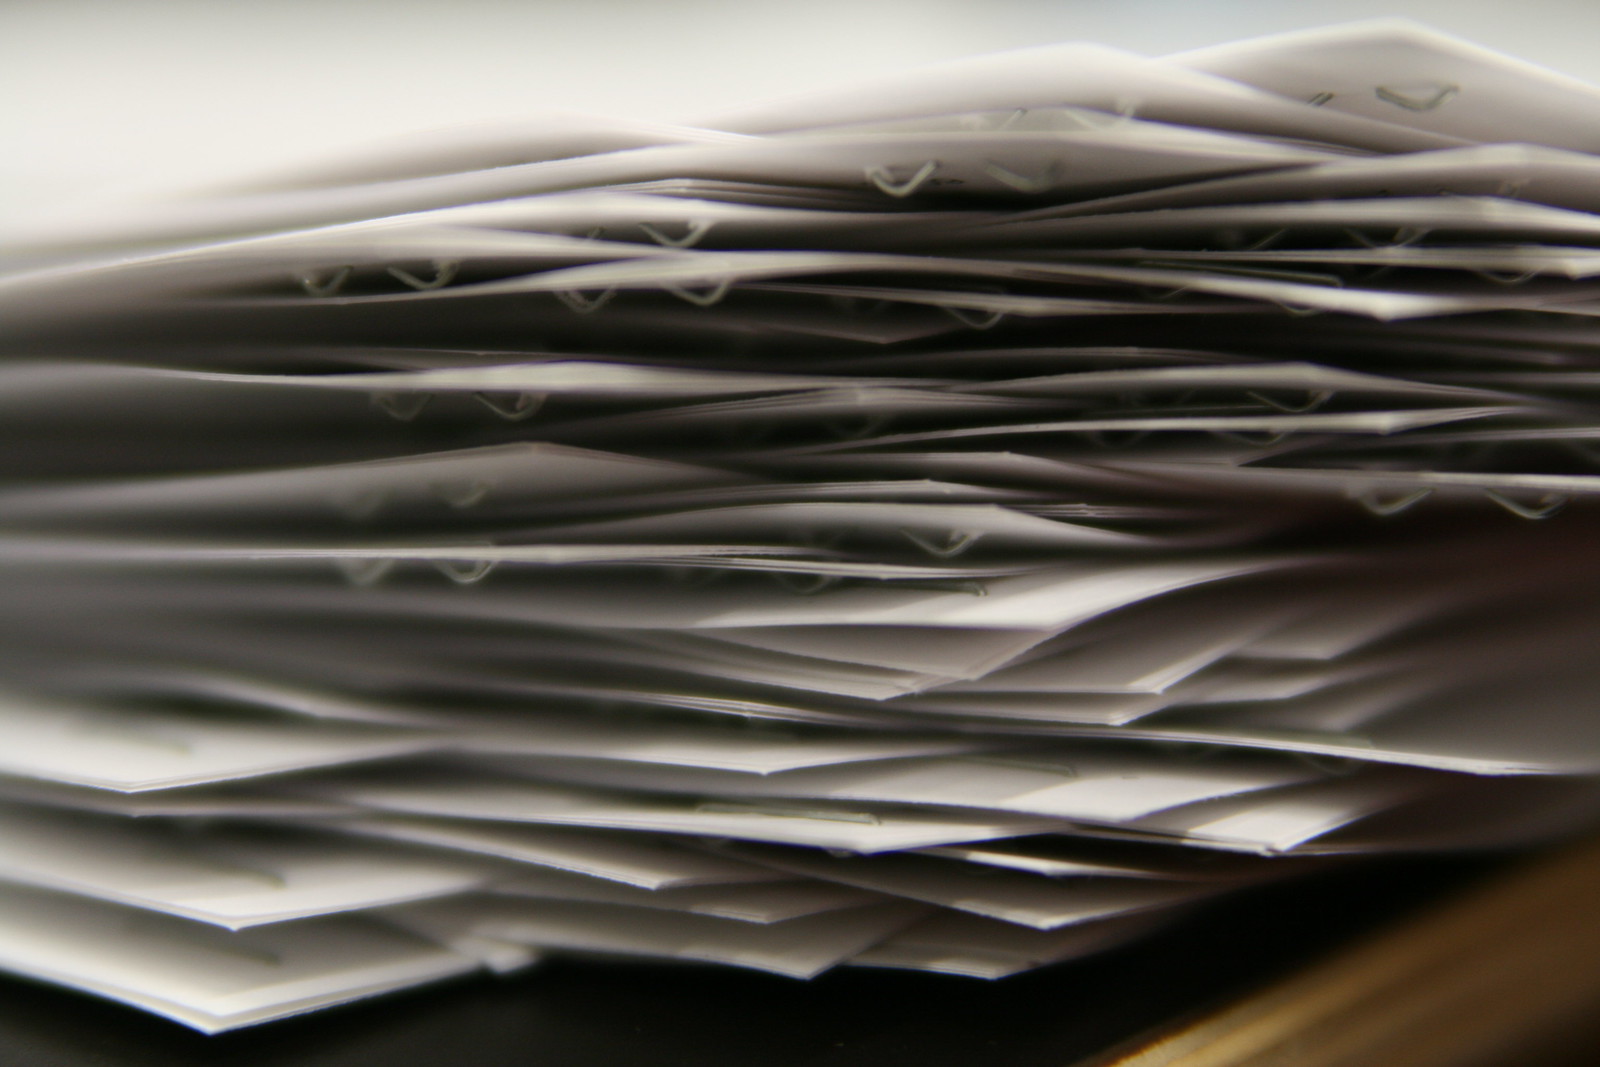 A pile of papers on a desk.